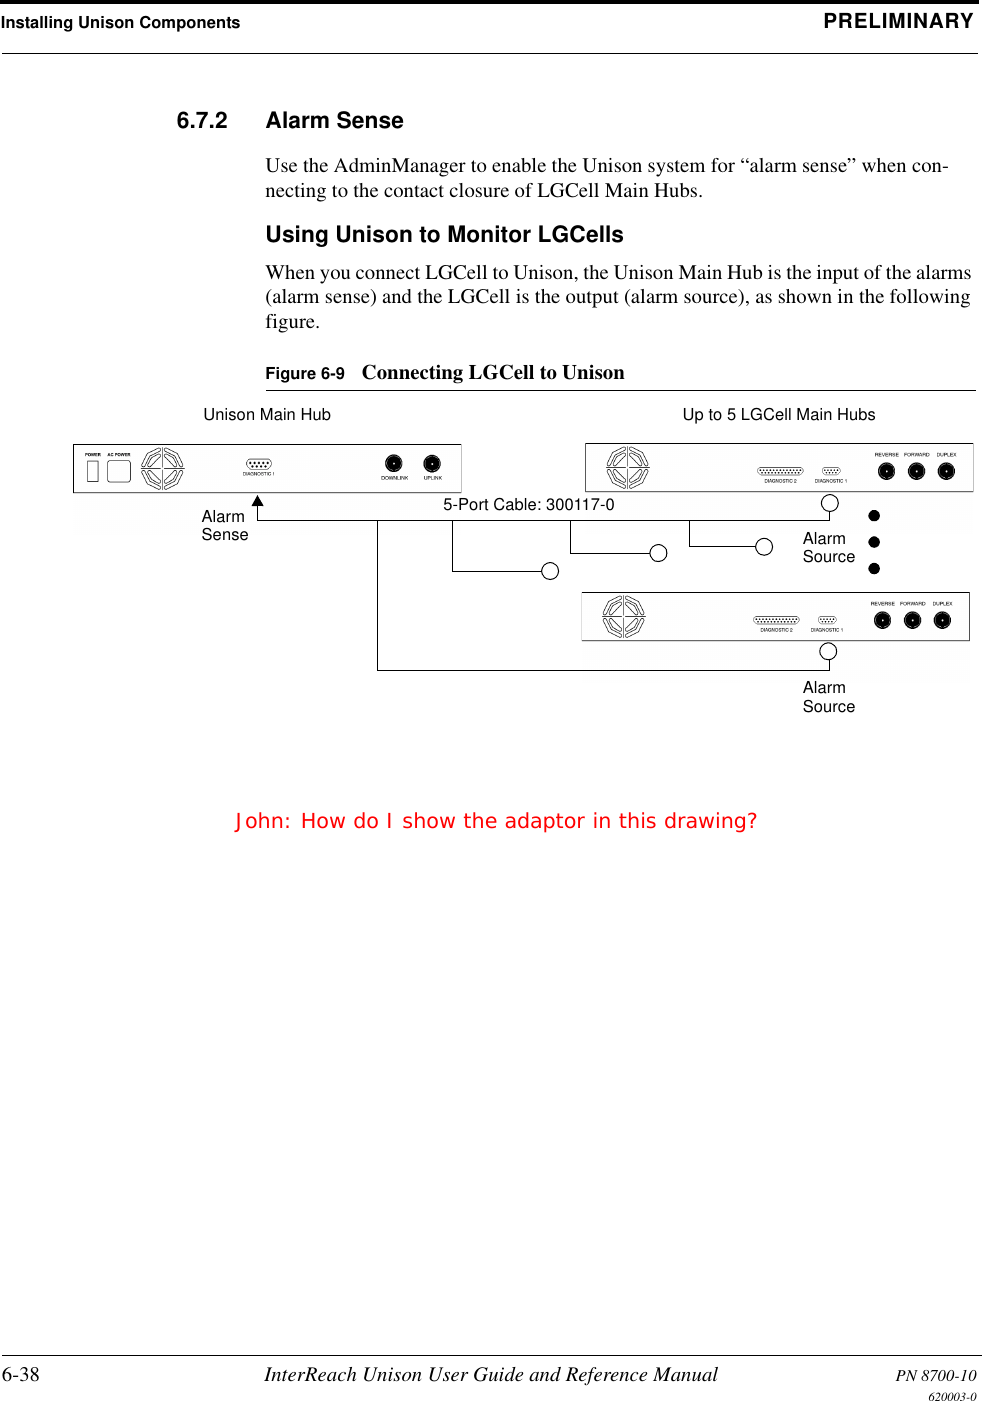 Installing Unison Components PRELIMINARY6-38 InterReach Unison User Guide and Reference Manual PN 8700-10620003-06.7.2 Alarm SenseUse the AdminManager to enable the Unison system for “alarm sense” when con-necting to the contact closure of LGCell Main Hubs.Using Unison to Monitor LGCellsWhen you connect LGCell to Unison, the Unison Main Hub is the input of the alarms (alarm sense) and the LGCell is the output (alarm source), as shown in the following figure.Figure 6-9 Connecting LGCell to UnisonUp to 5 LGCell Main HubsUnison Main Hub5-Port Cable: 300117-0AlarmSense AlarmSourceAlarmSourceJohn: How do I show the adaptor in this drawing?